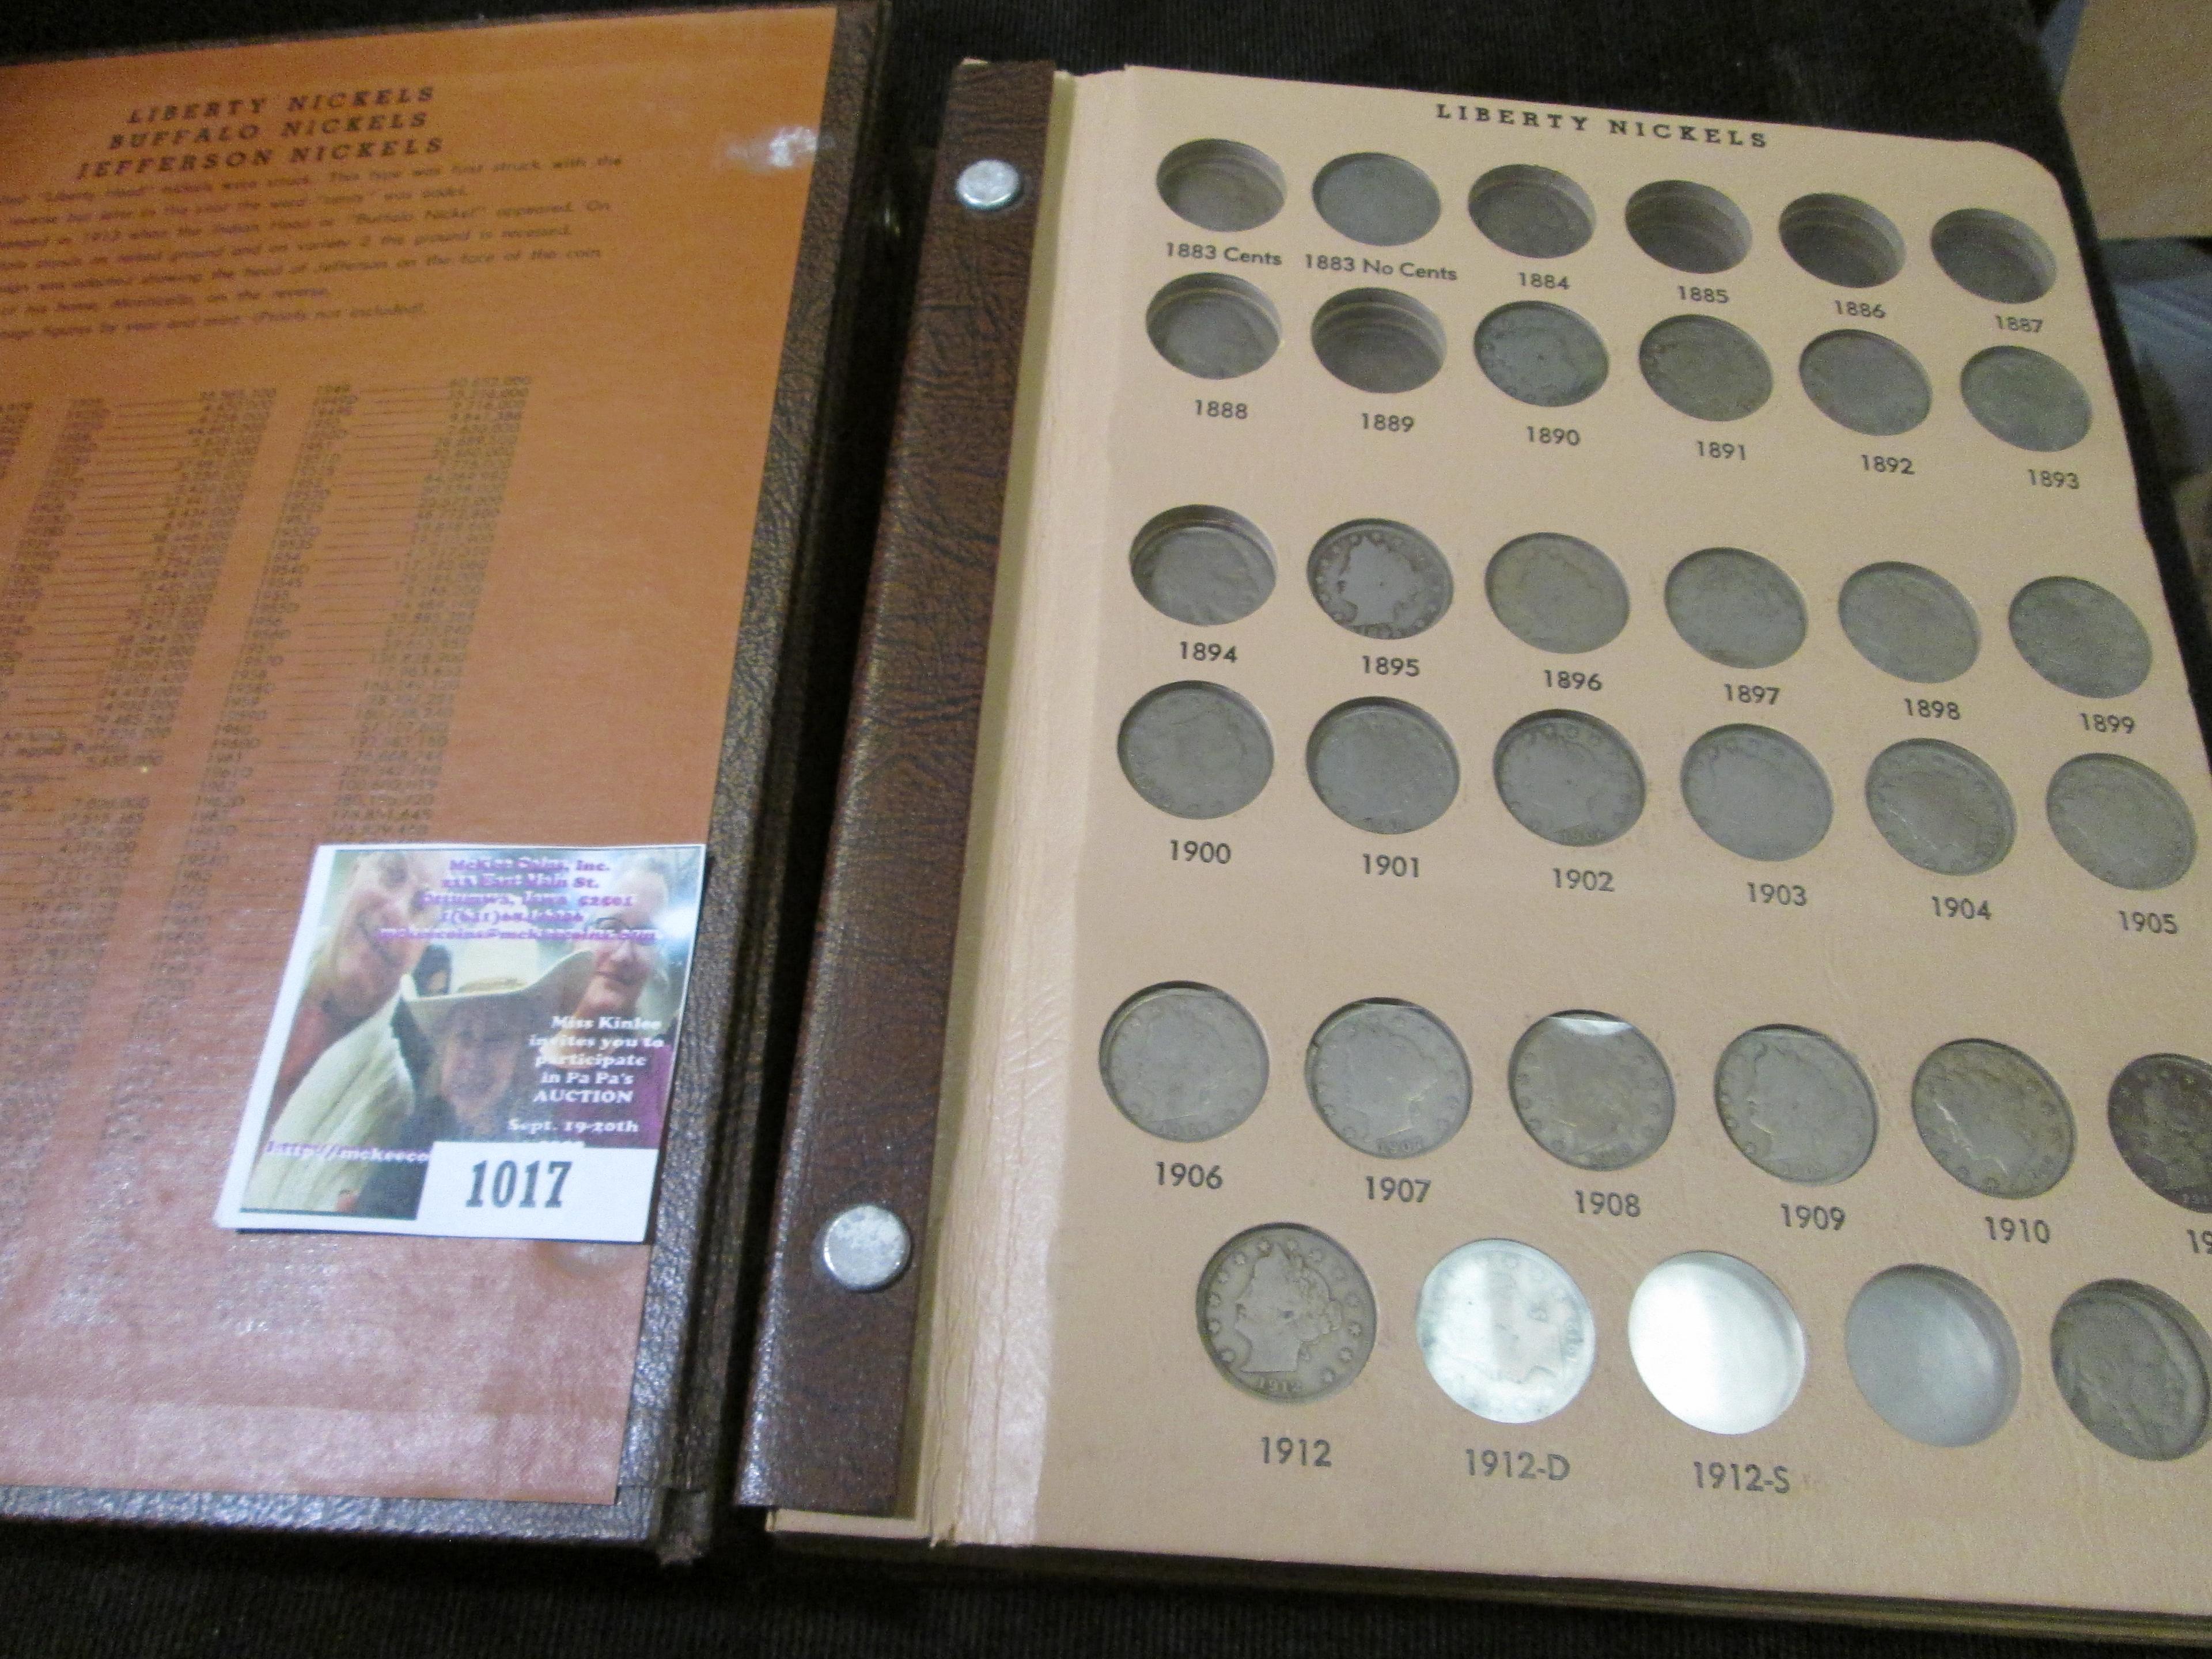 Deluxe World Coin Library Album containing a partial set of Nickels dating 1883-1989. Includes (24)